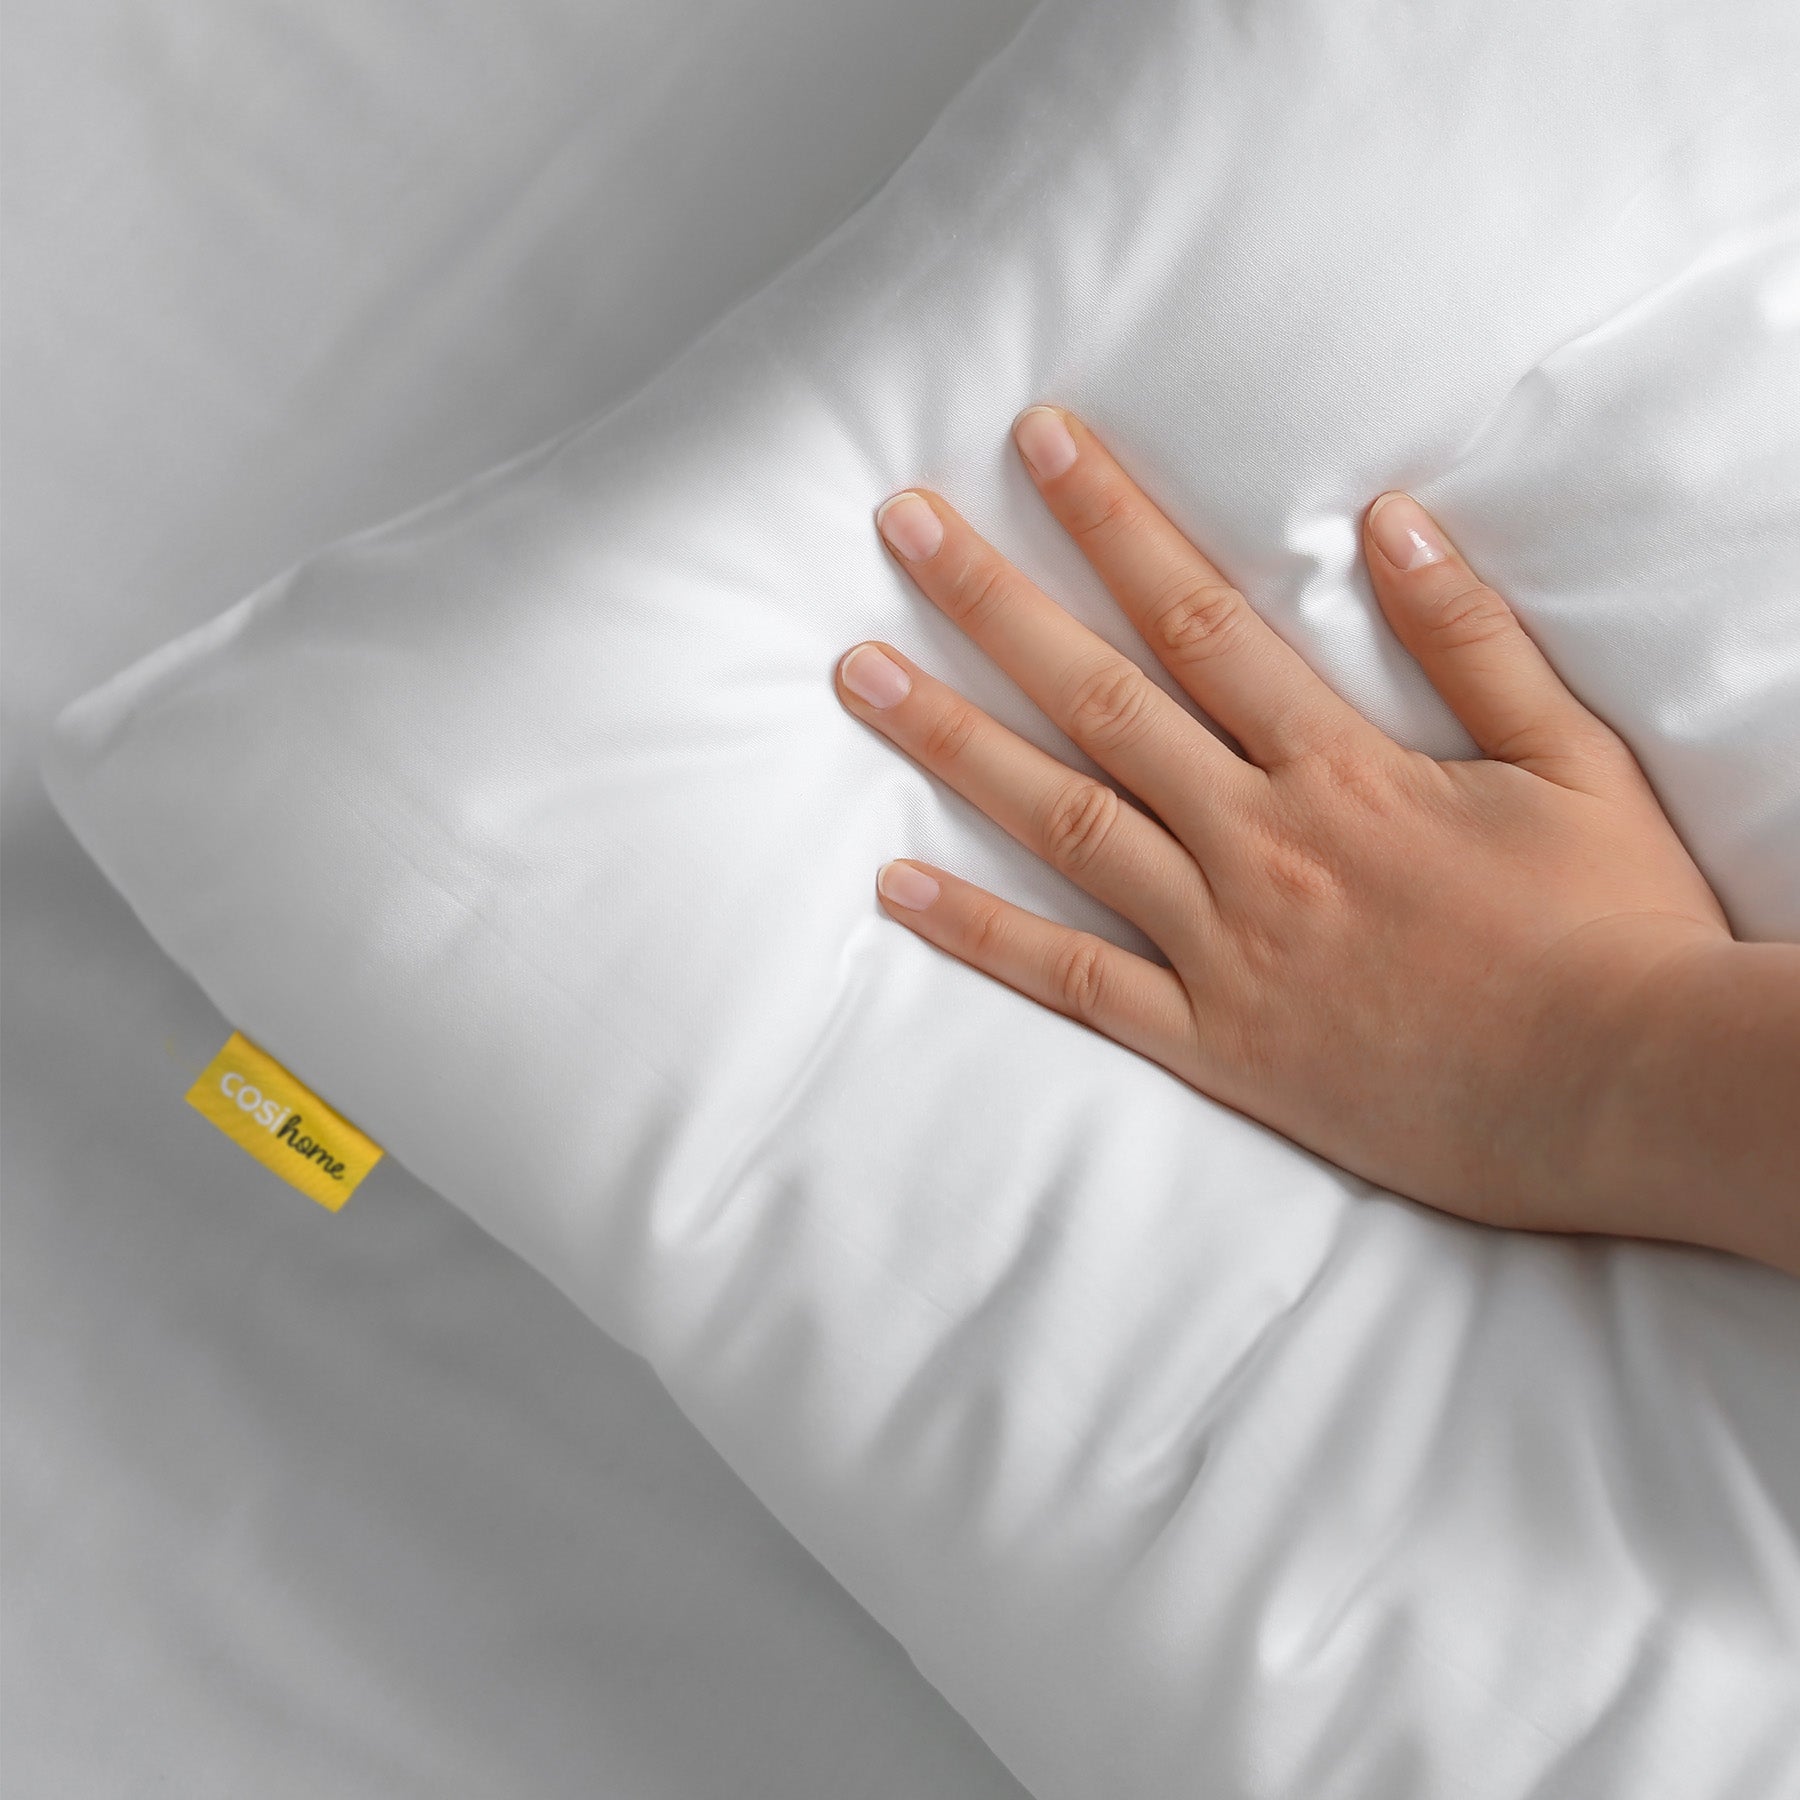 80 x 50 cm Yellow Cooling Pillow Case - 2 Pack